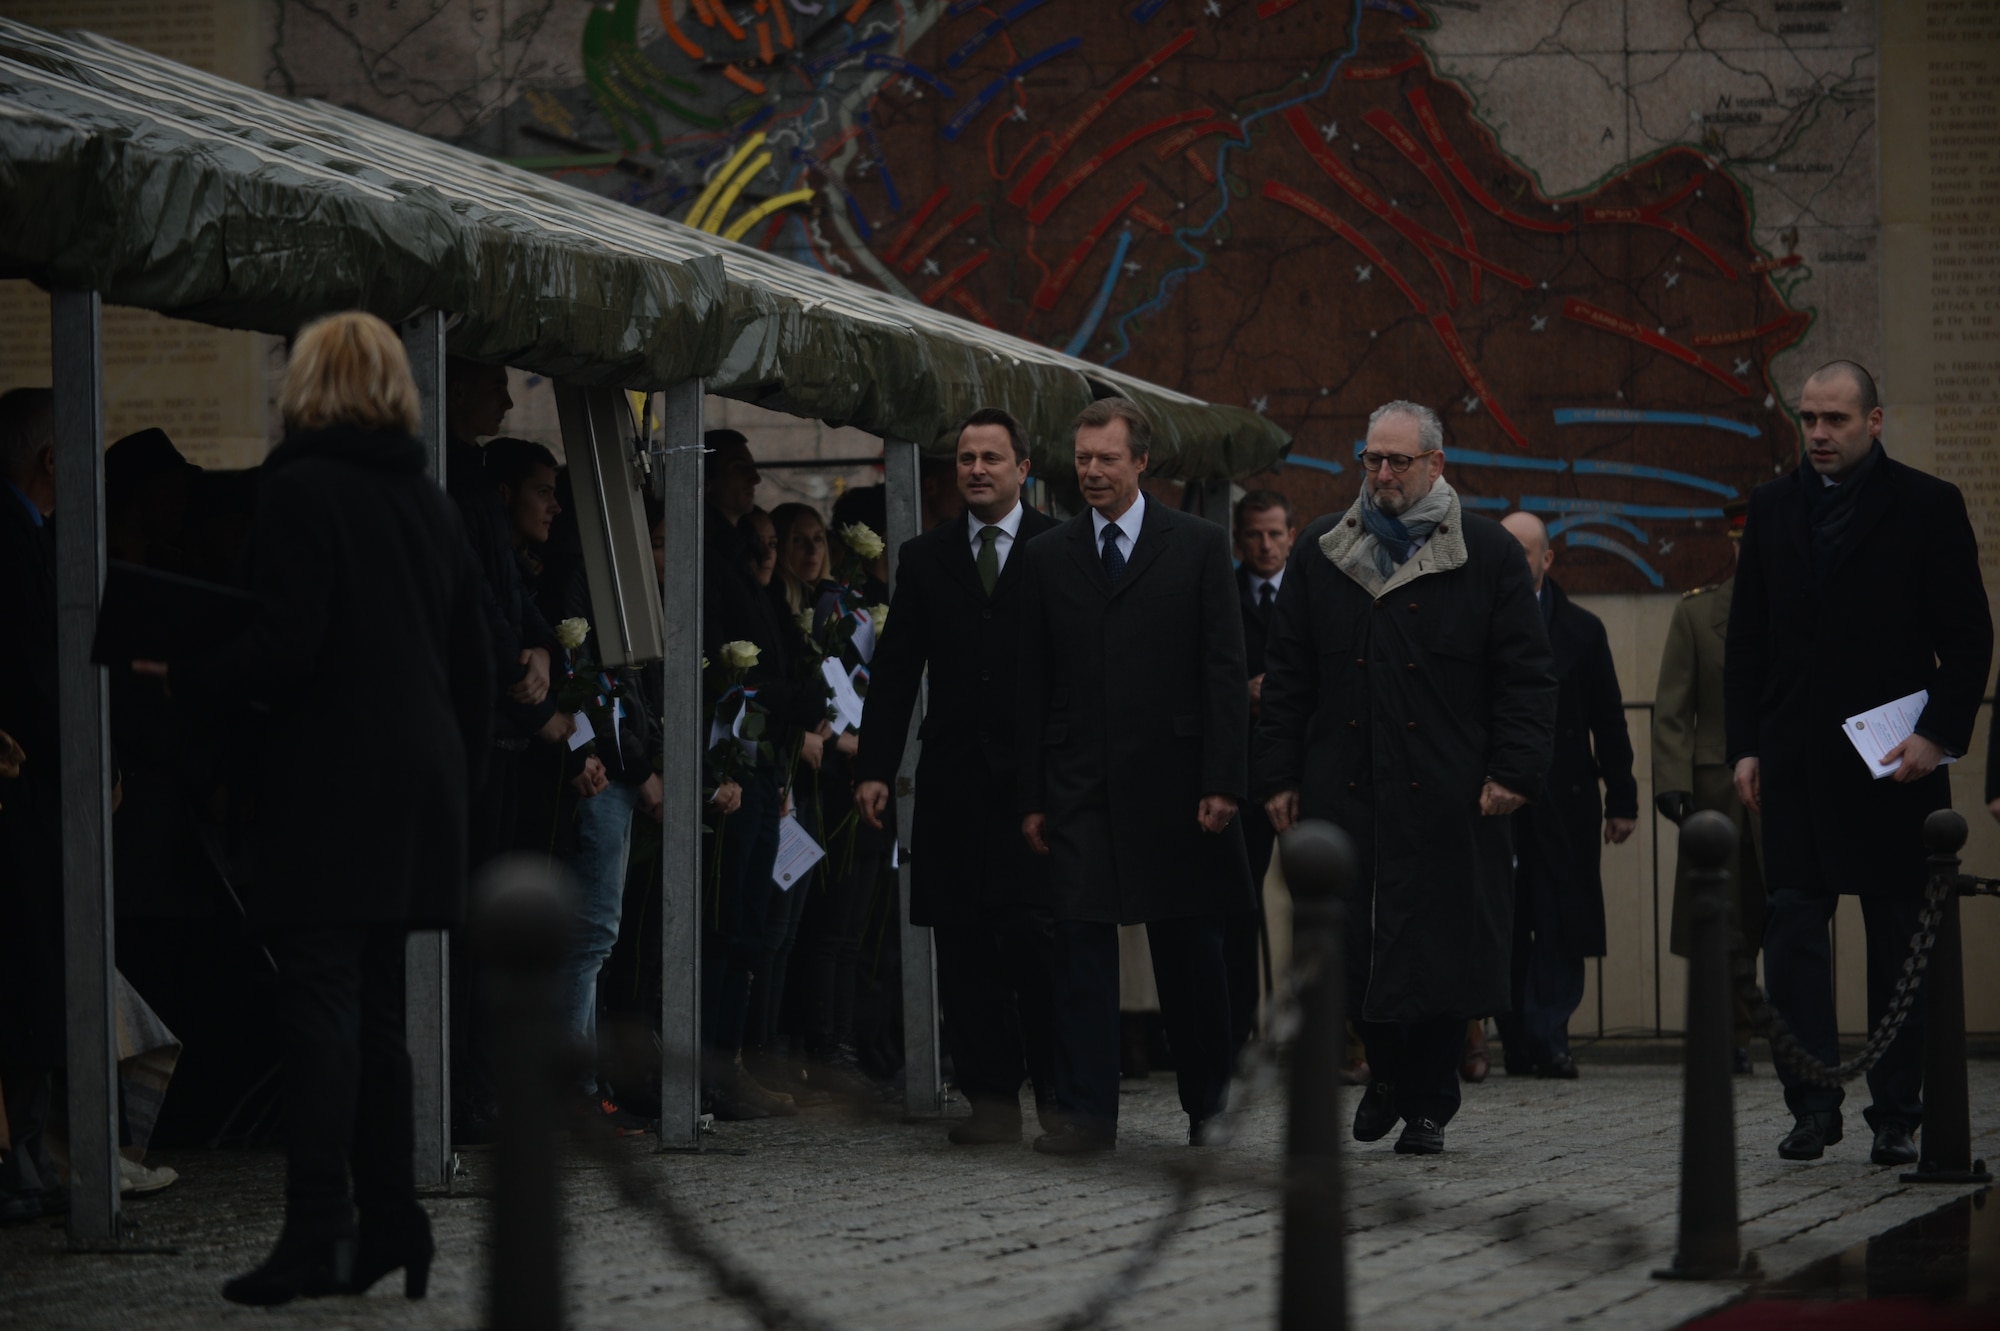 Grand Duke Henri of Luxembourg, center; Xavier Bettel, prime minister of Luxembourg, center left; and Robert Mandell, U.S. ambassador to Luxembourg, center right, walk to their seats before a commemorative ceremony at Luxembourg American Cemetery and Memorial in Luxembourg, Dec. 16, 2014. The ceremony observed the 70th anniversary of the Battle of the Bulge, a six-week campaign in the Ardennes region Dec. 16, 1944 through Jan. 25, 1945. (U.S. Air Force photo by Staff Sgt. Joe W. McFadden/Released) 